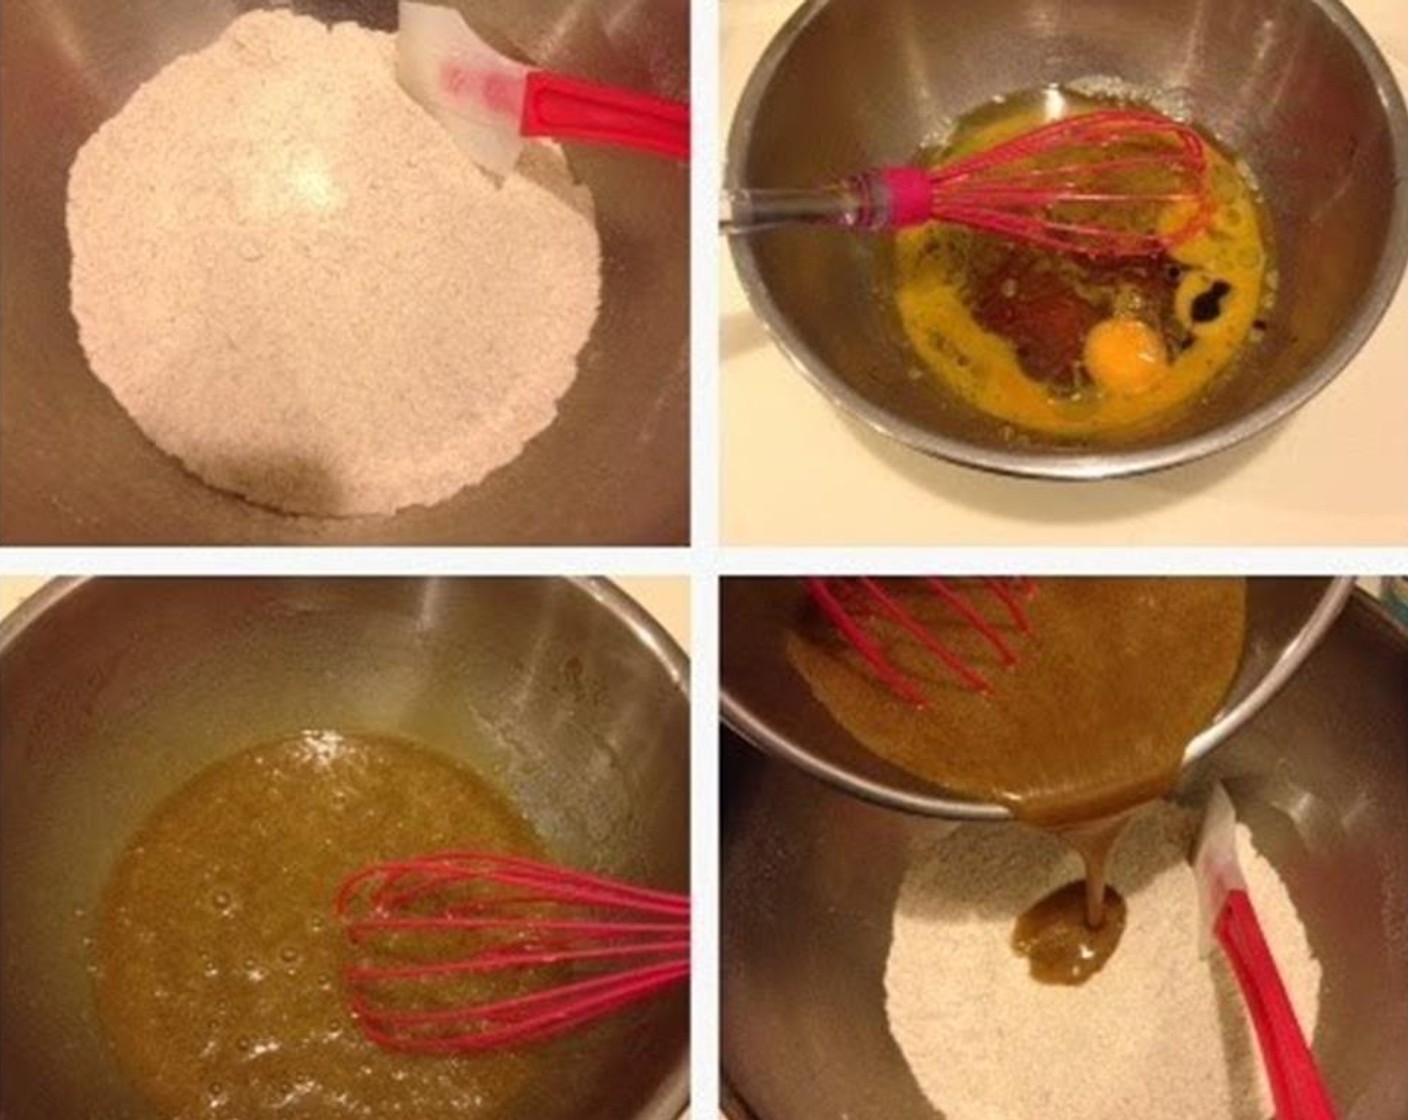 step 8 Sift Whole Wheat Self-Rising Flour (1 cup), plain All-Purpose Flour (1/2 cup),  Baking Soda (1 tsp) and Ground Cinnamon (1/2 tsp) together into a bowl. Add in Granulated Sugar (1/4 cup) and mix the dry ingredients well.